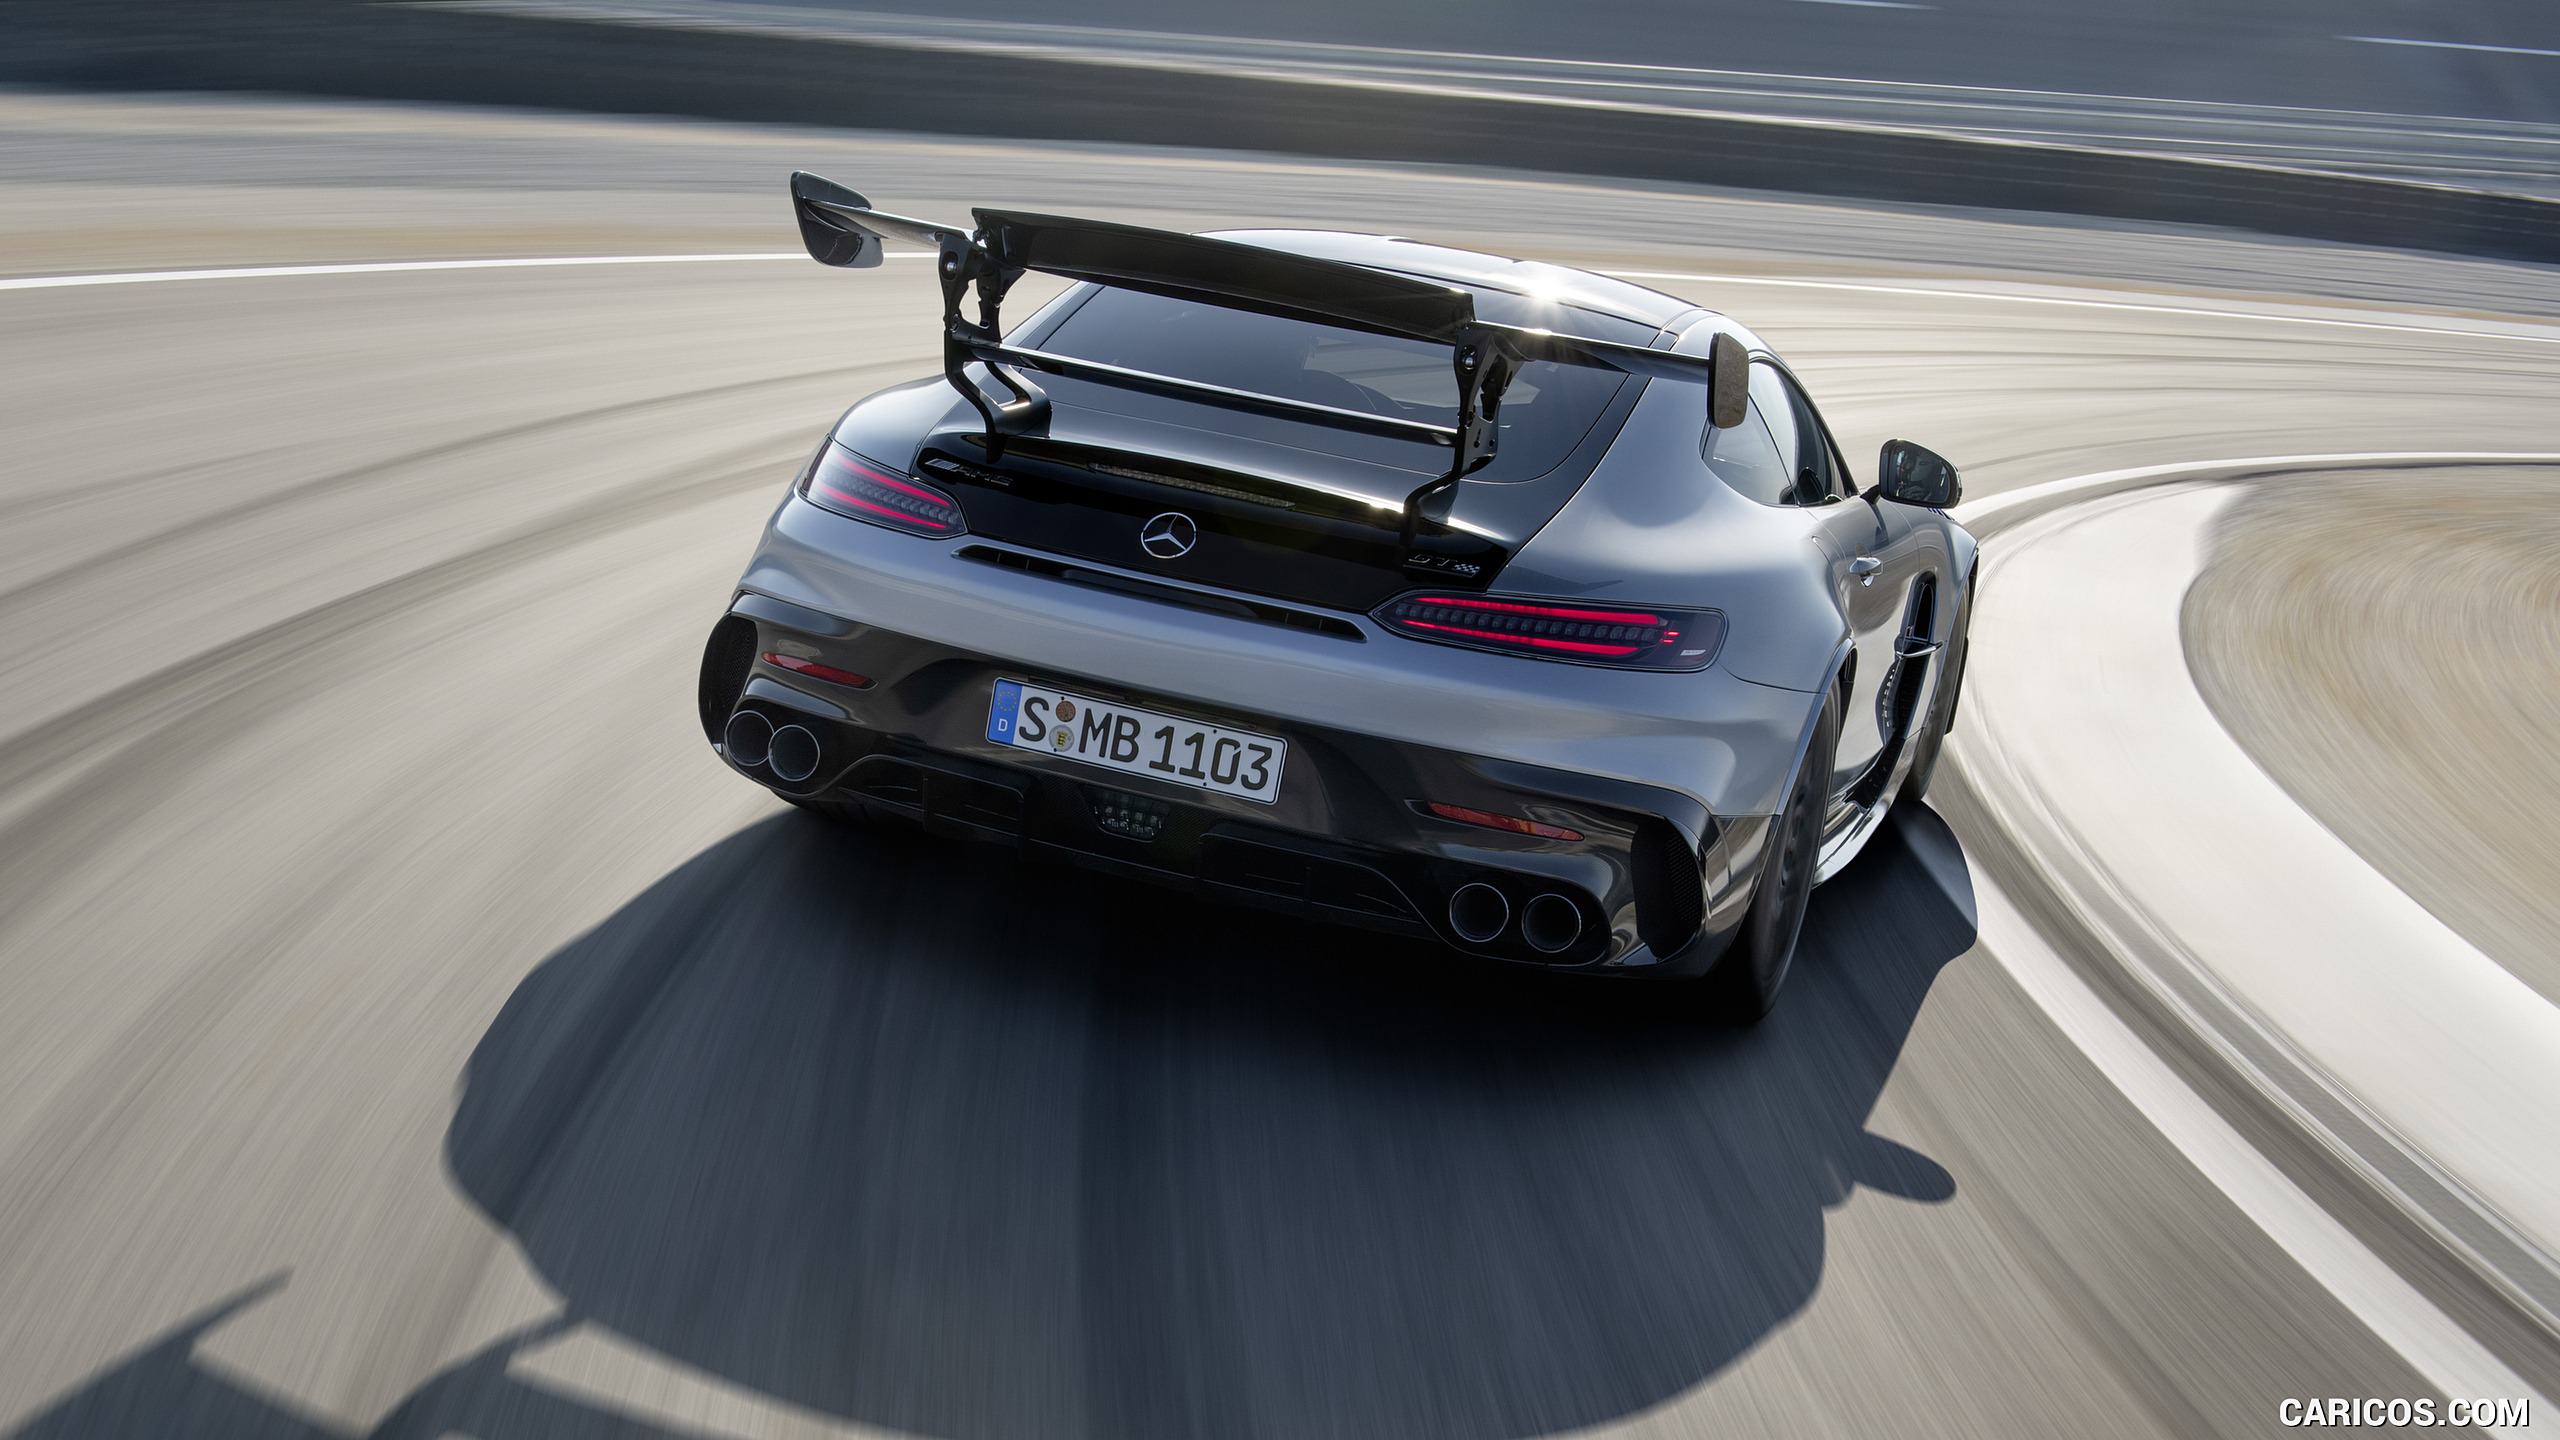 2021 Mercedes-AMG GT Black Series (Color: High Tech Silver) - Rear, #35 of 215